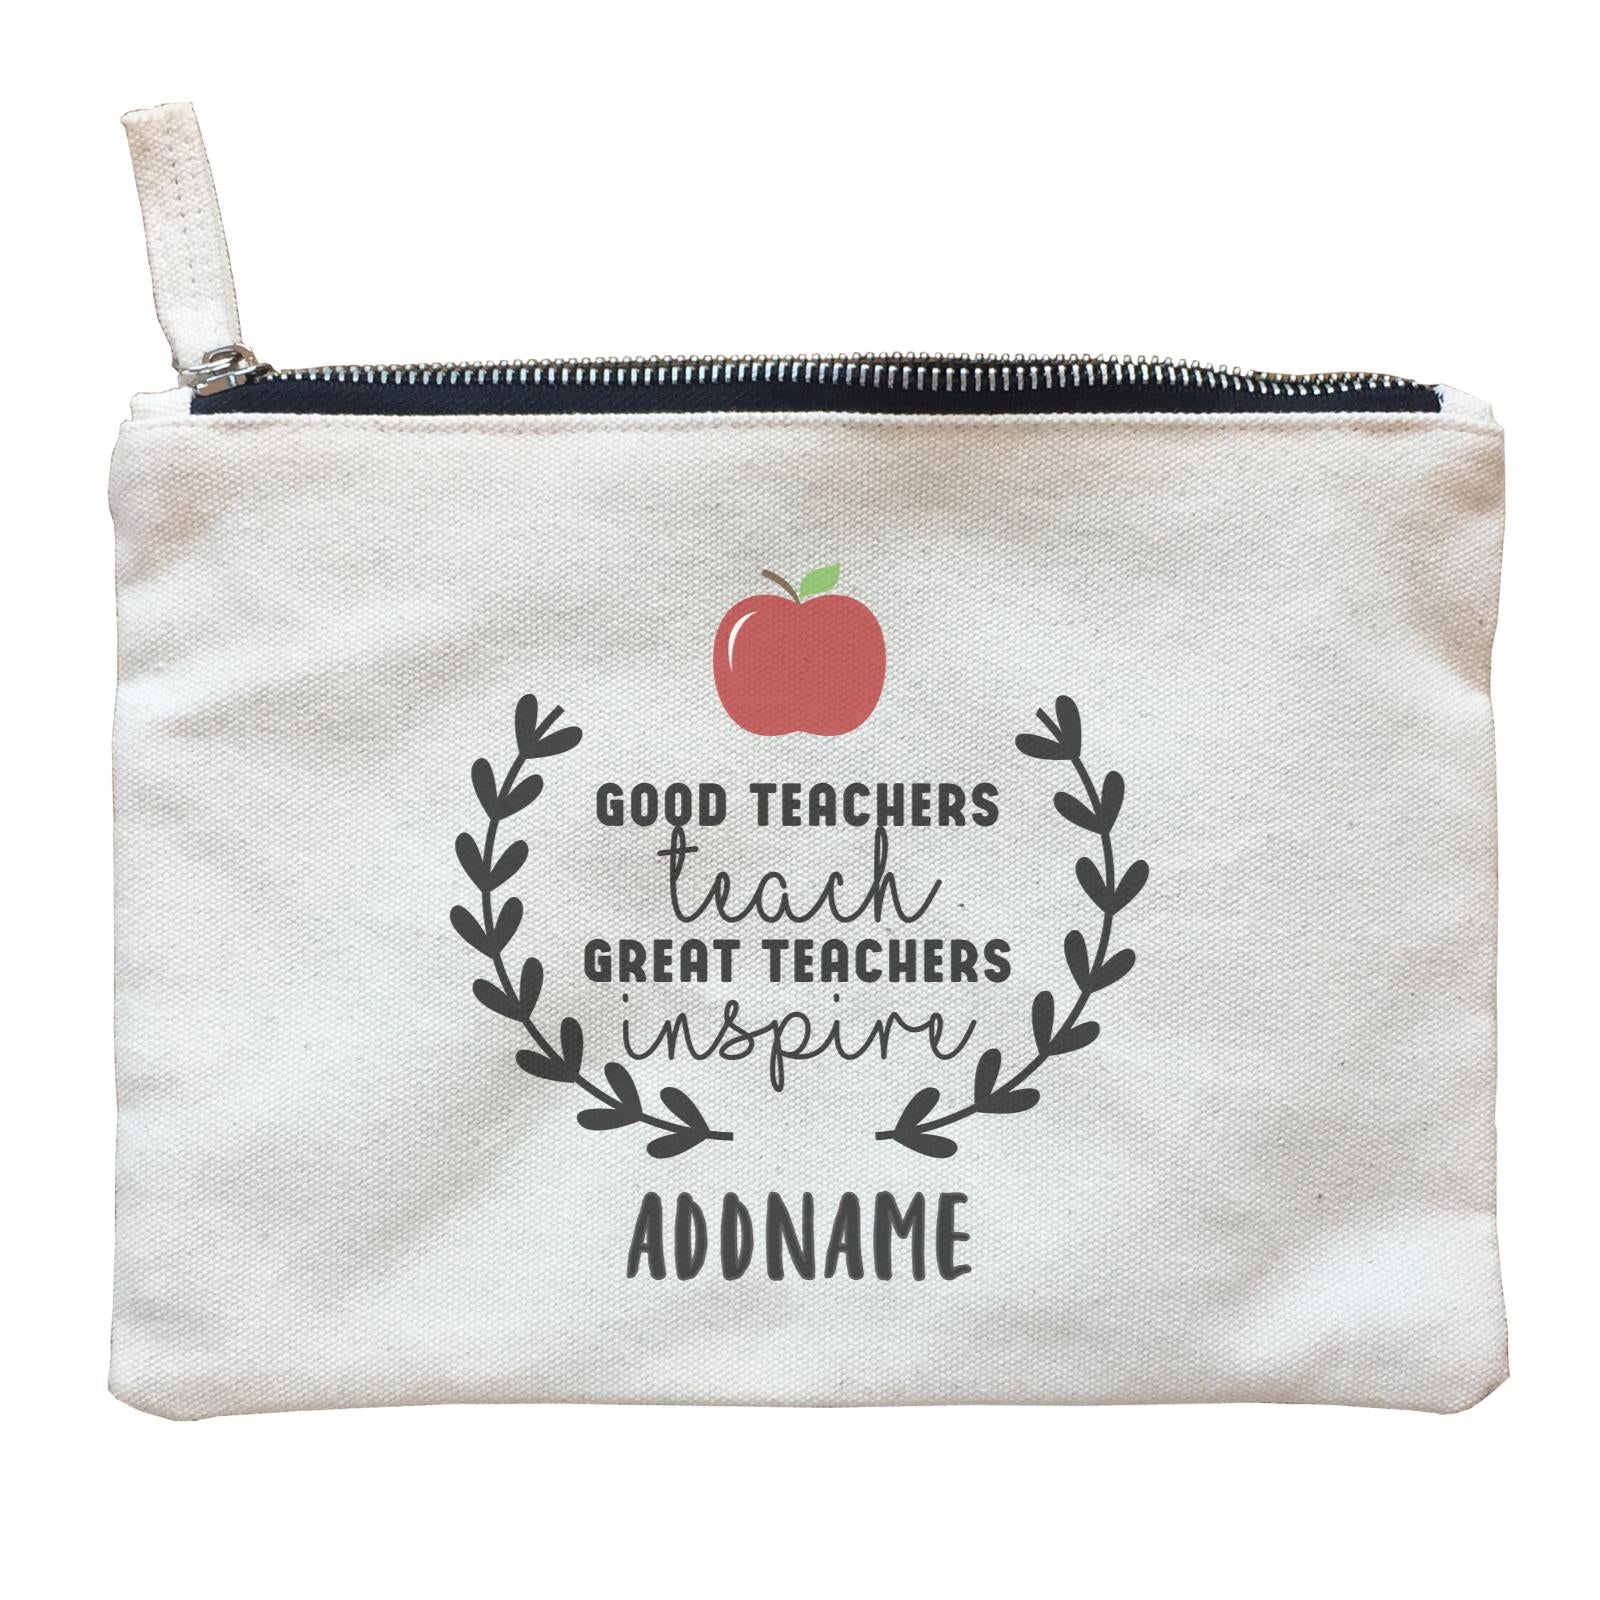 Great Teachers Good Teachers Teach Great Teachers Inspire Addname Zipper Pouch